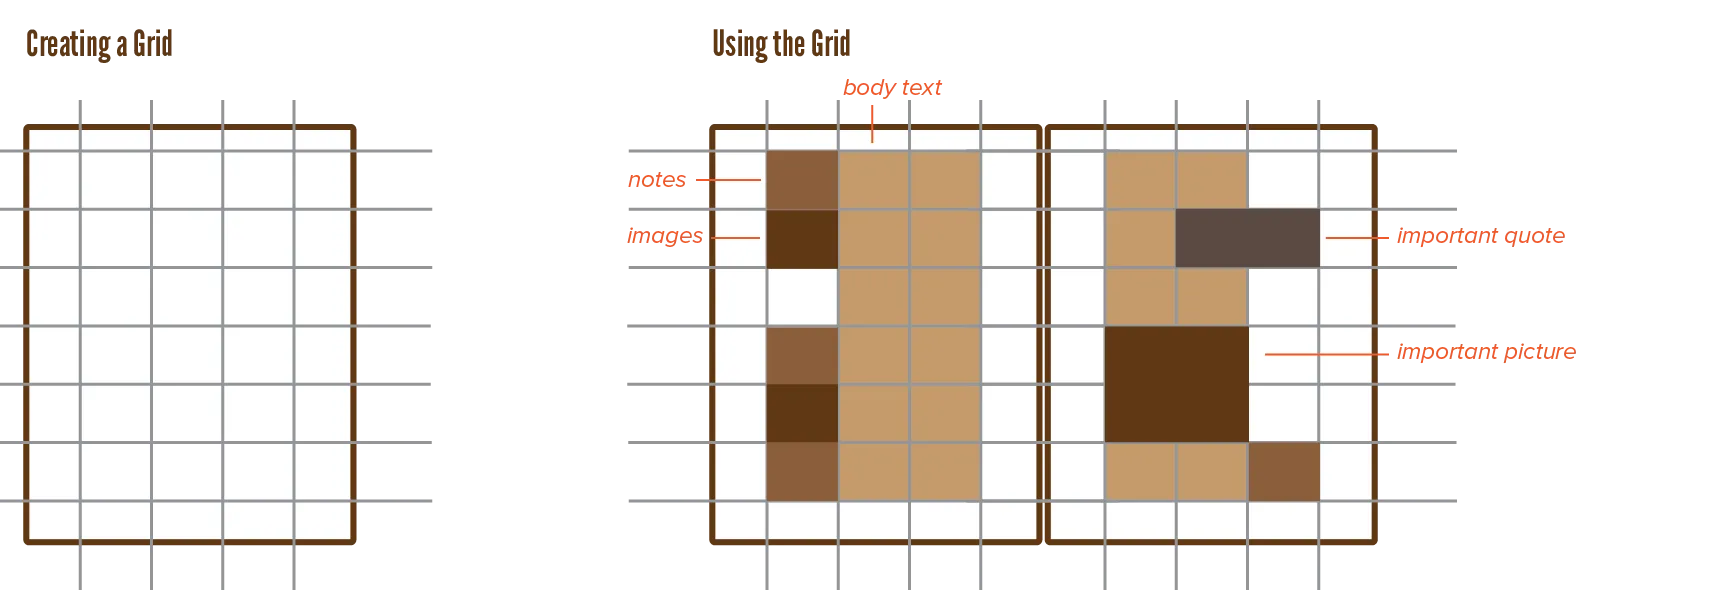 Example of grids using multiple columns.